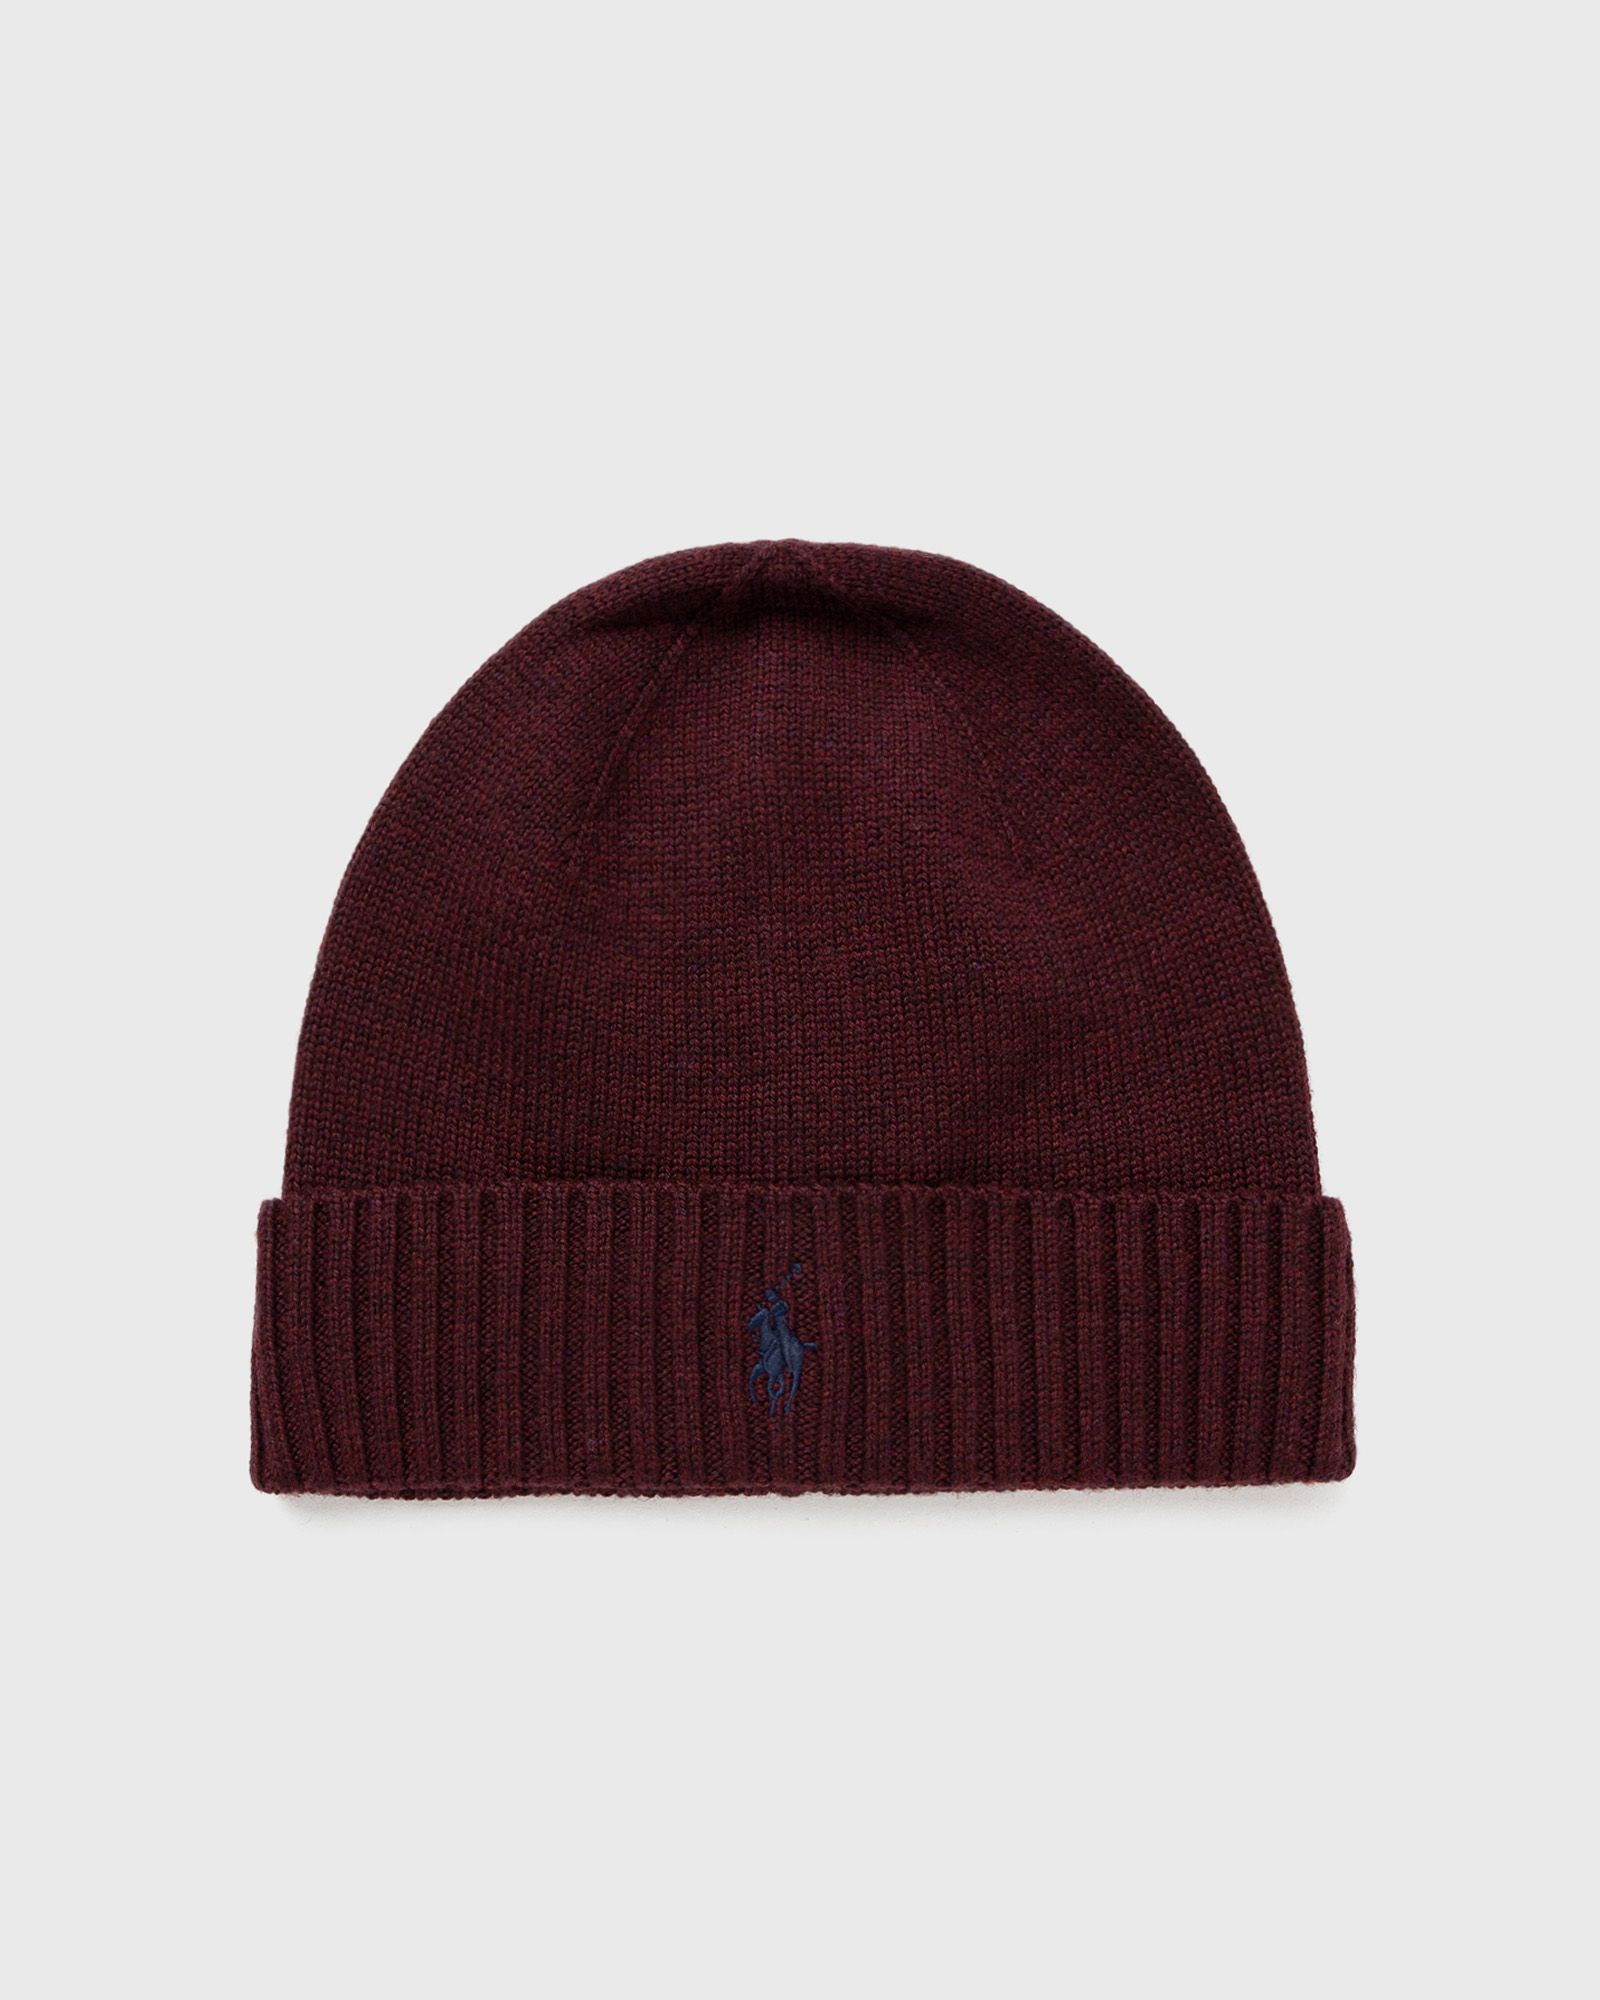 Polo Ralph Lauren - fo hat-cold weather-hat men beanies red in größe:one size